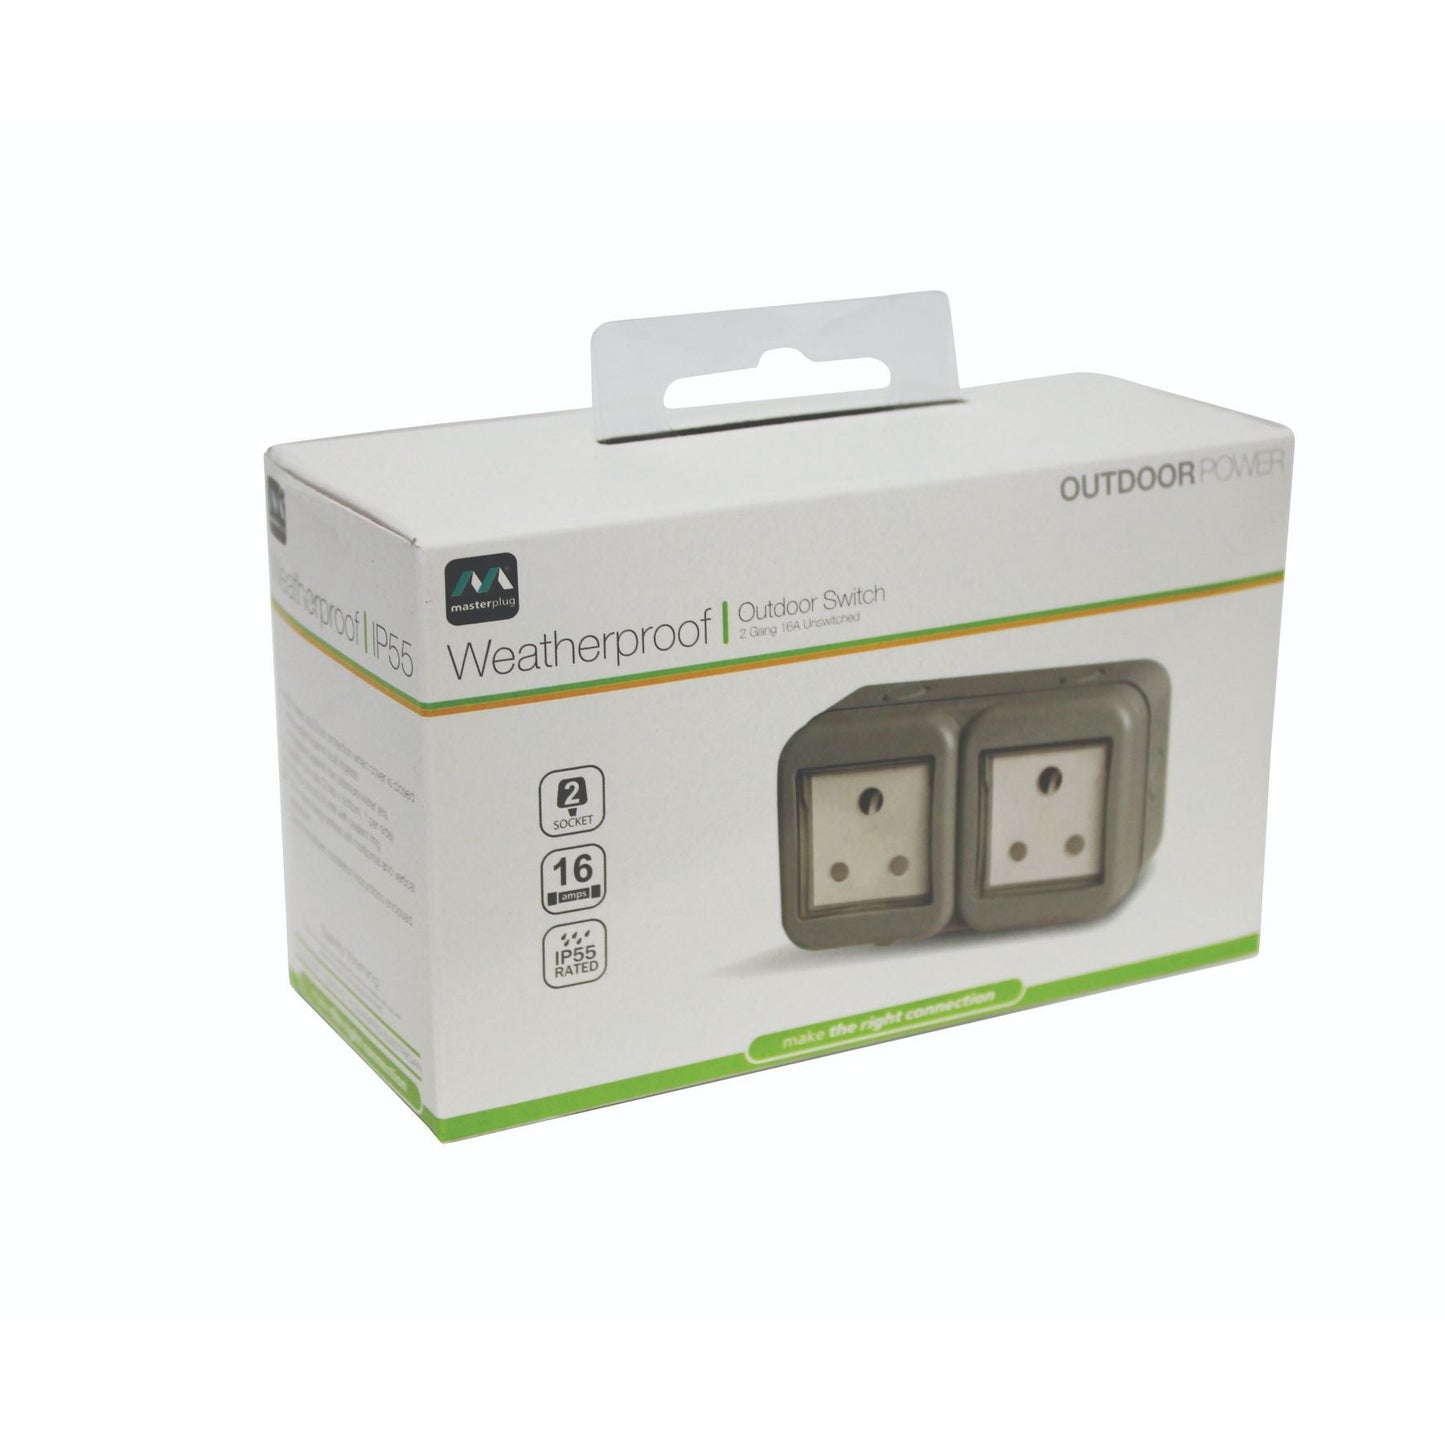 IP55 DOUBLE UNSWITCHED 16A SA OUTDOOR SOCKET (2 X 3 PIN)